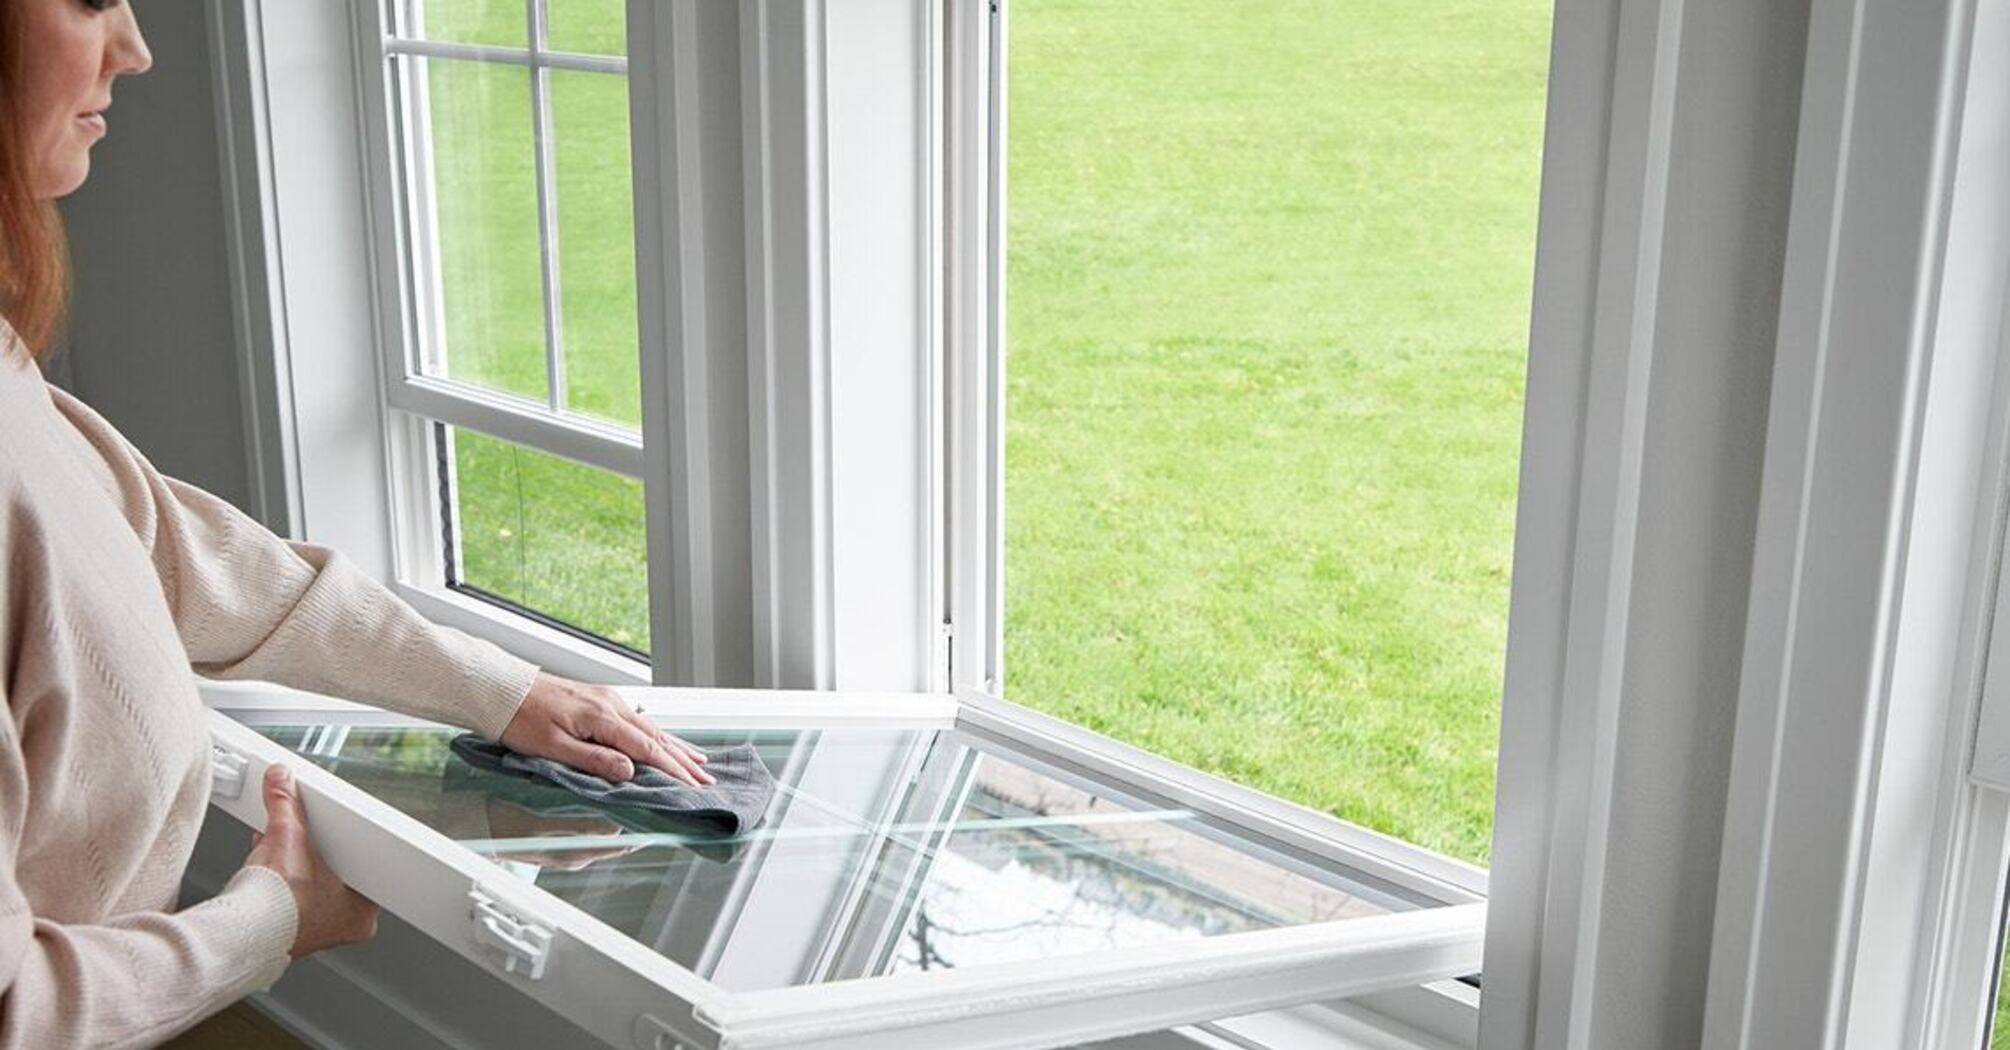 How to wash windows to avoid streaks